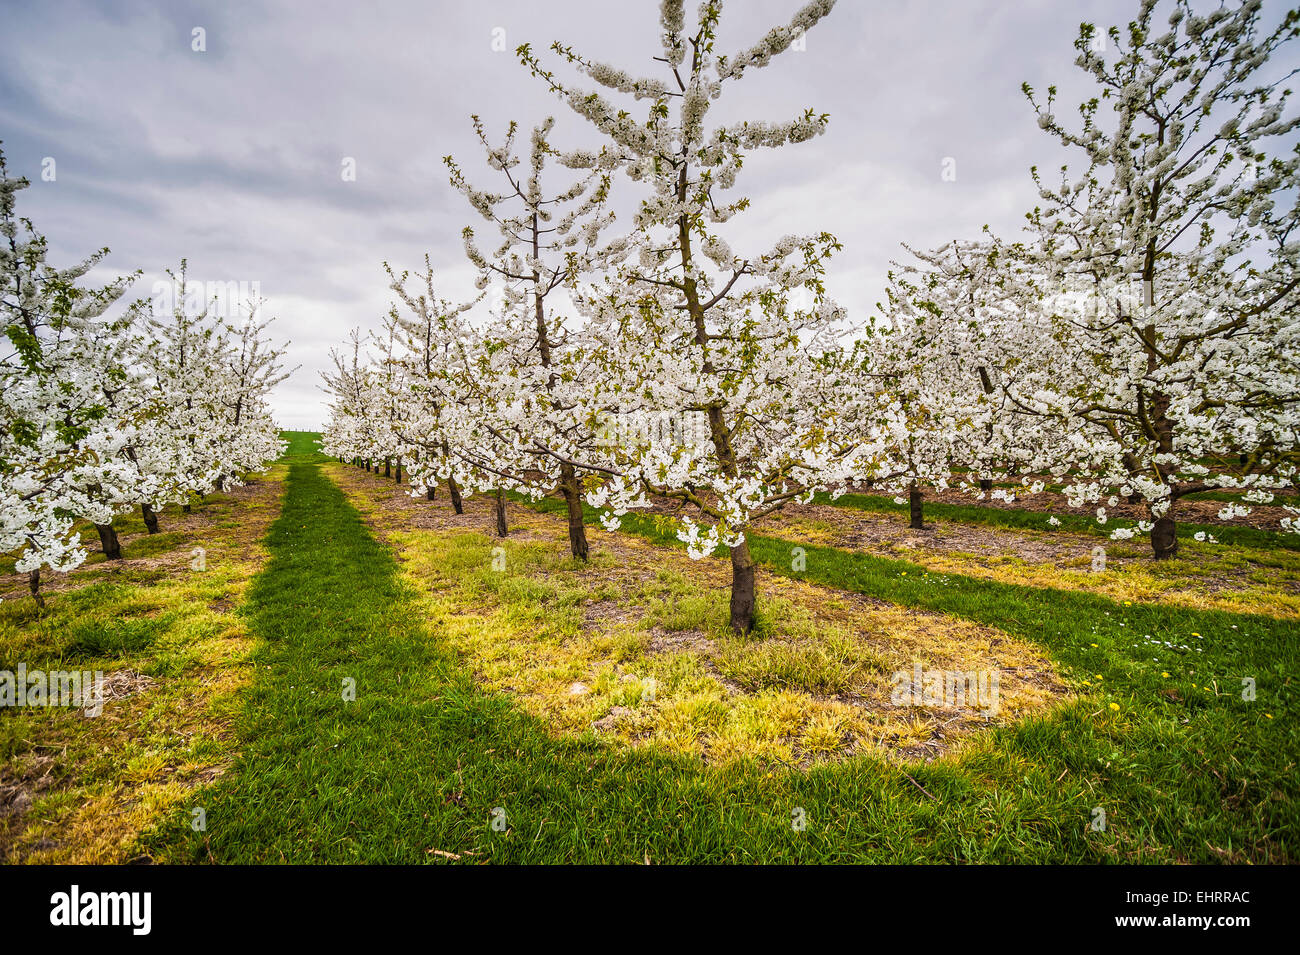 young apple trees blooming at springtime Stock Photo